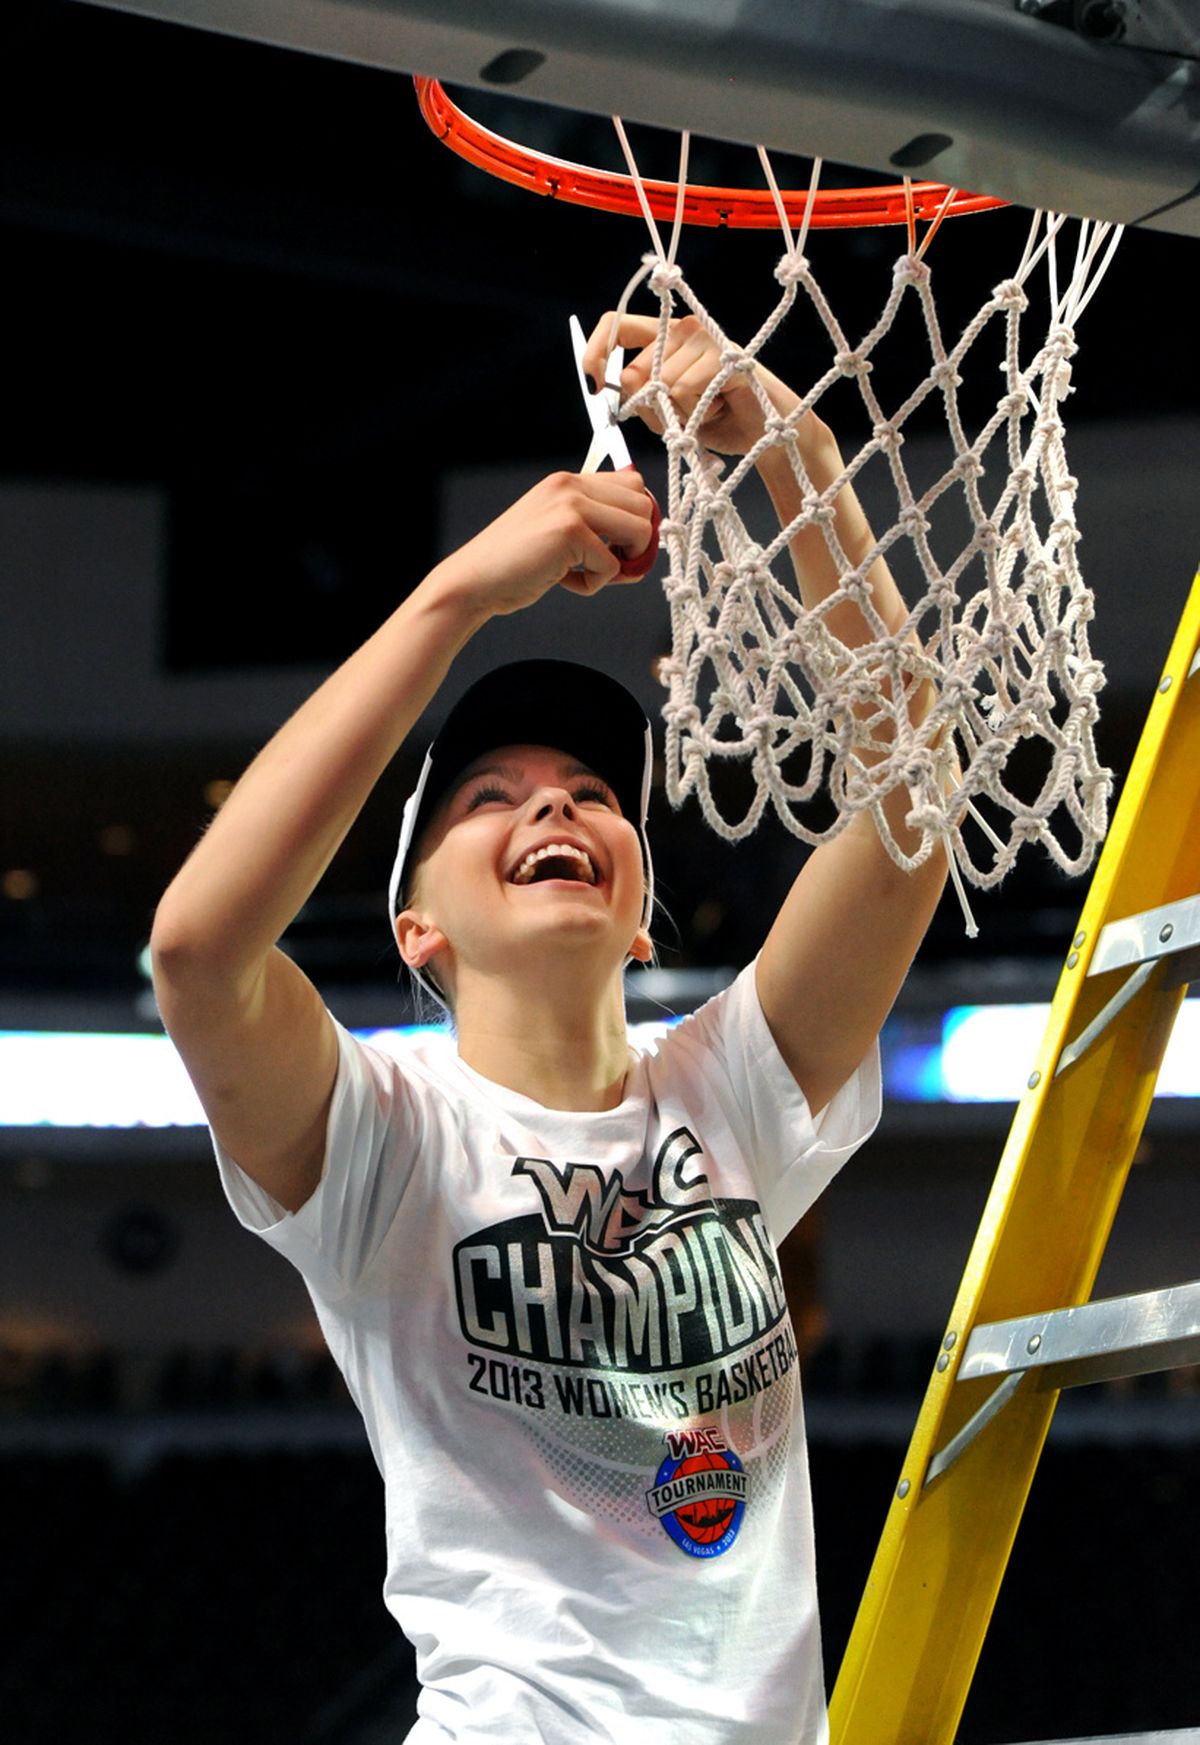 Idaho’s Alyssa Charlston takes her turn cutting down a piece of the net following victory. (Associated Press)